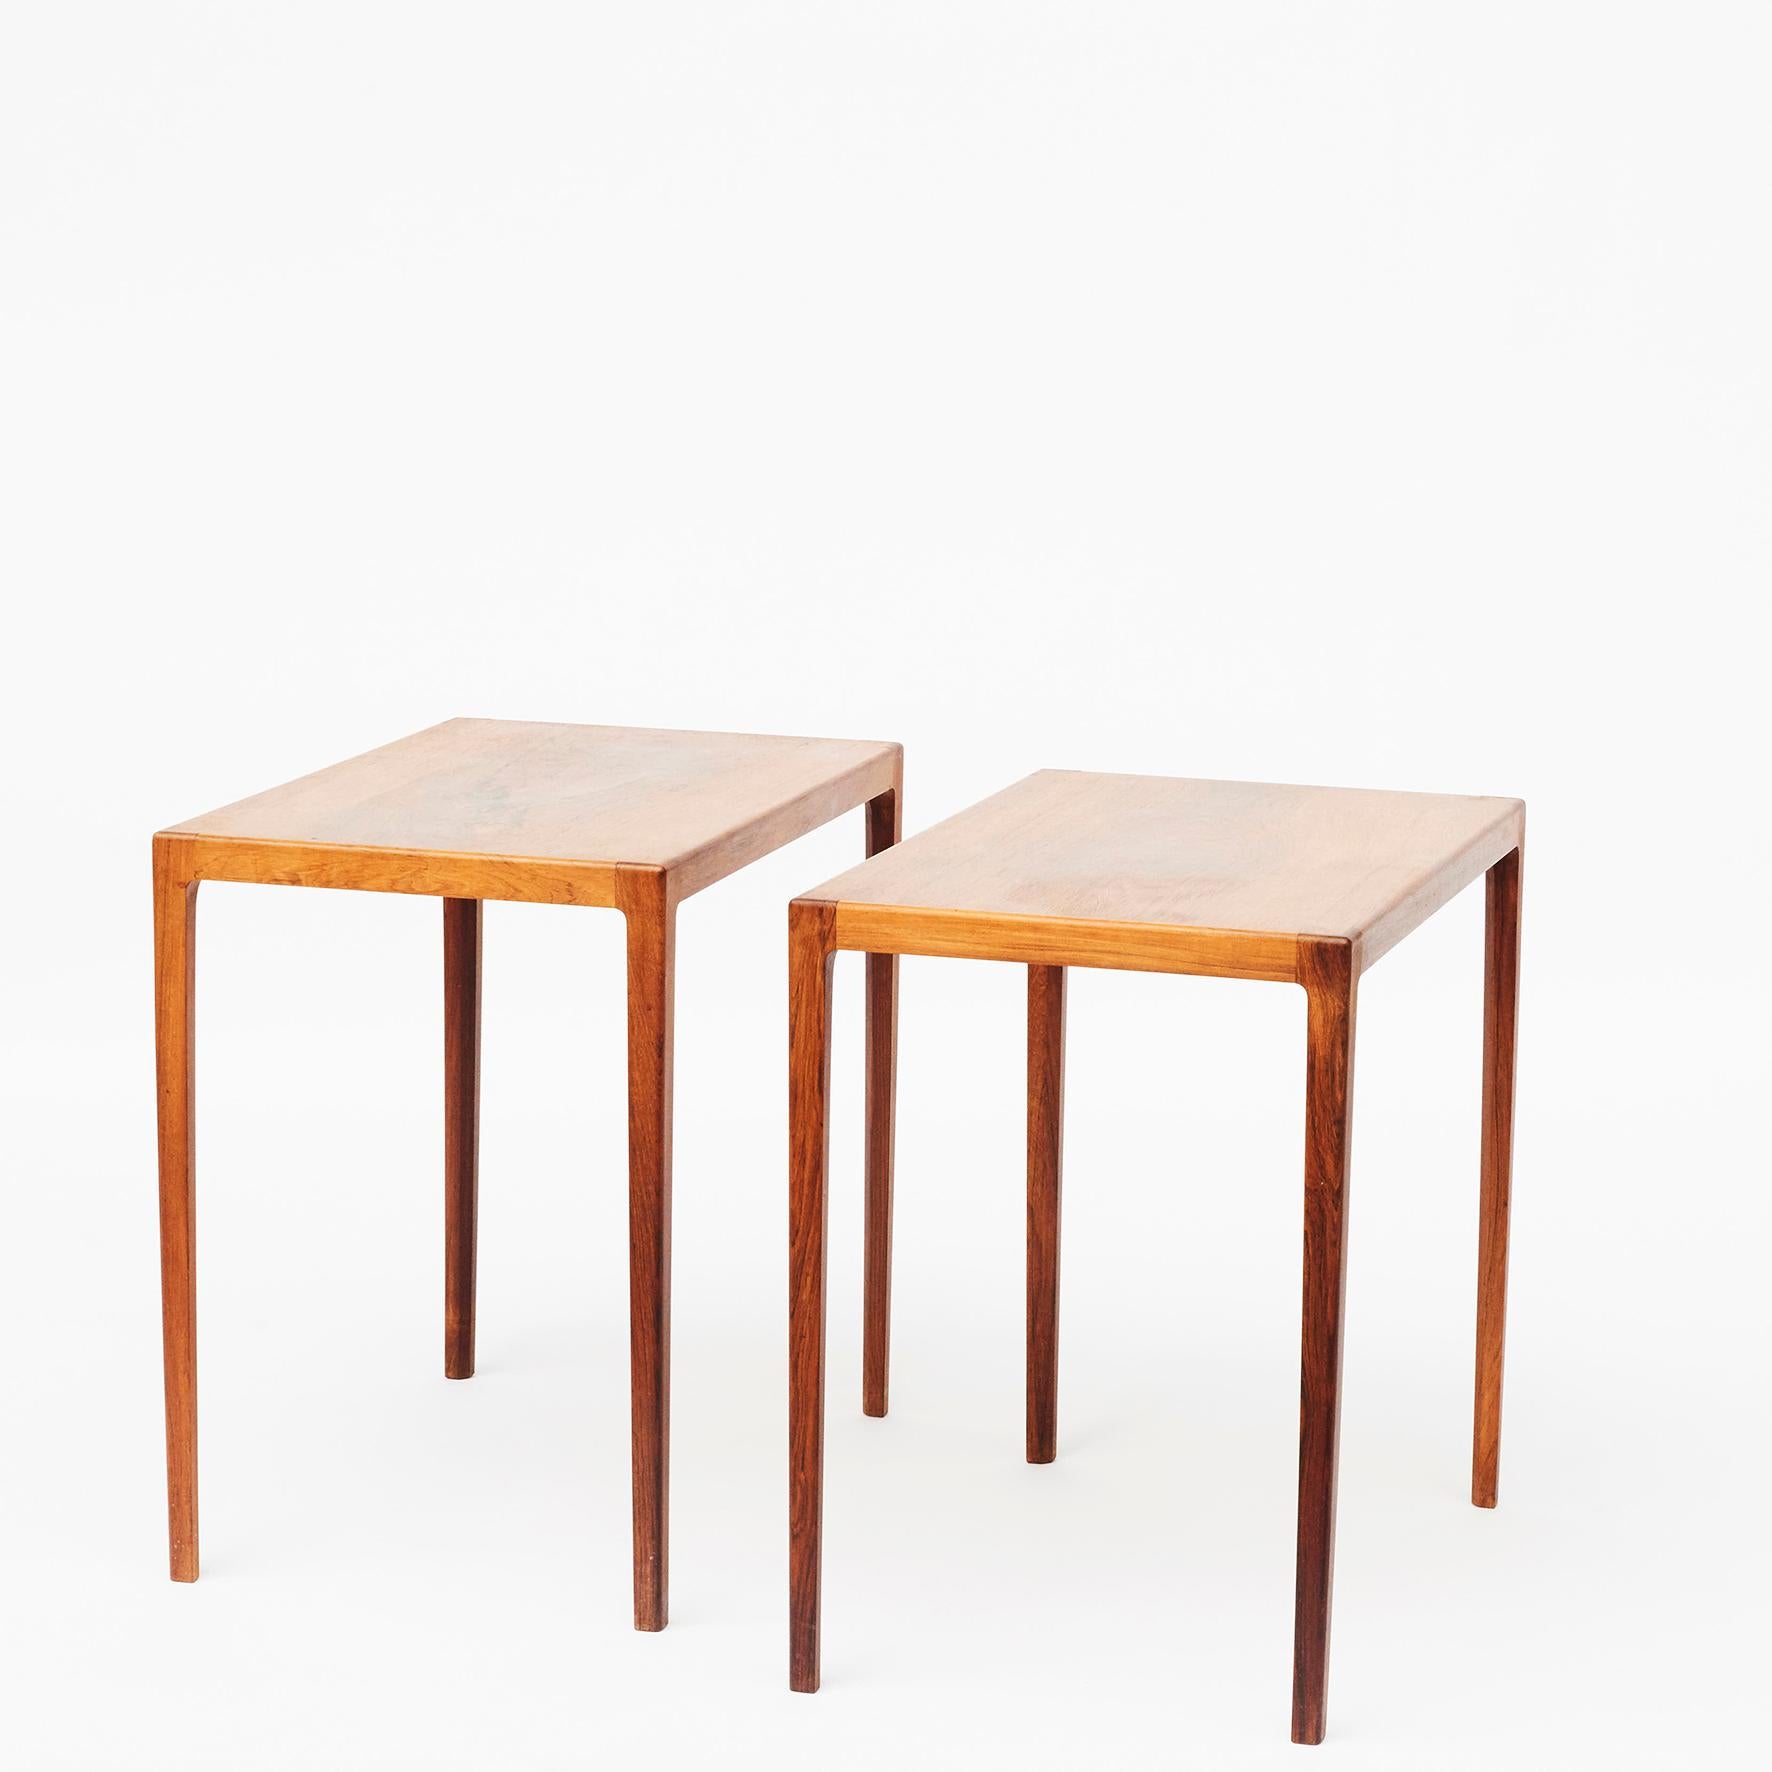 This beautiful pair of modern side tables are designed by Ludvig Pontoppidan, Denmark, circa 1960. In rosewood
Slender tapered legs.
In original untouched condition.
Sold as a pair.